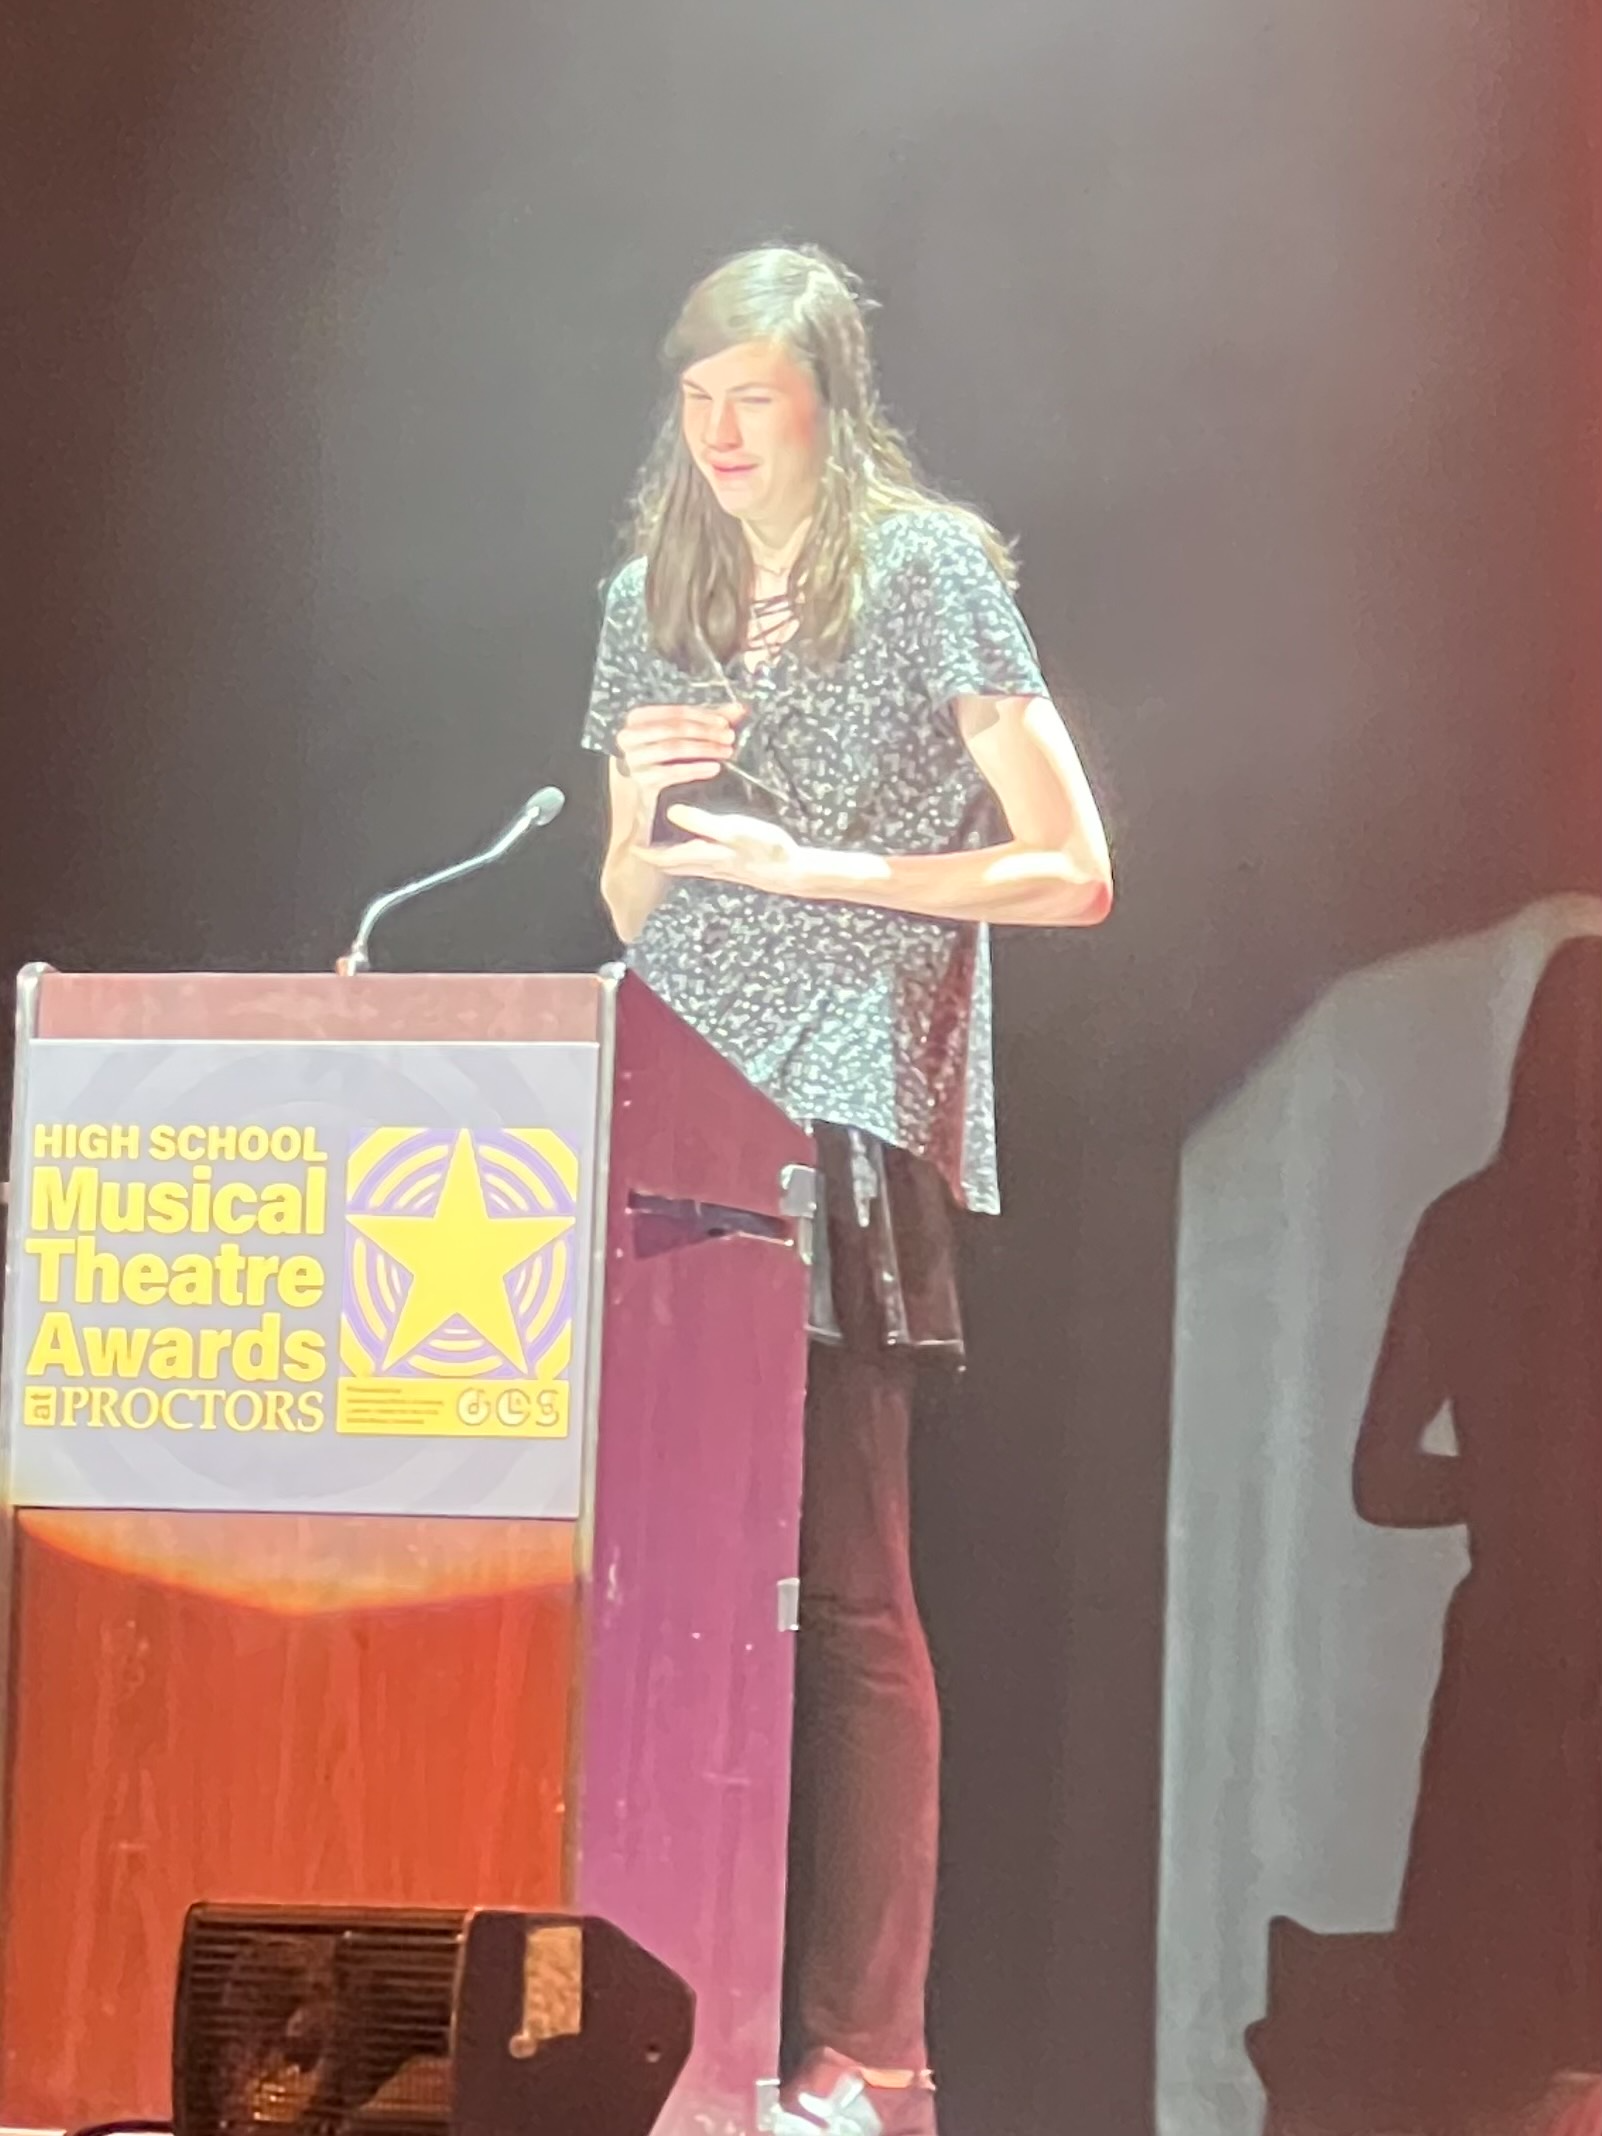 The high School Musical Theatre Awards were held at Proctors last weekend. Schenectady students Yael Woods and Fred Durocher were the first Schenectady students to ever be nominated for the High School Musical Theatre Awards and Yael Woods won best supporting actress!